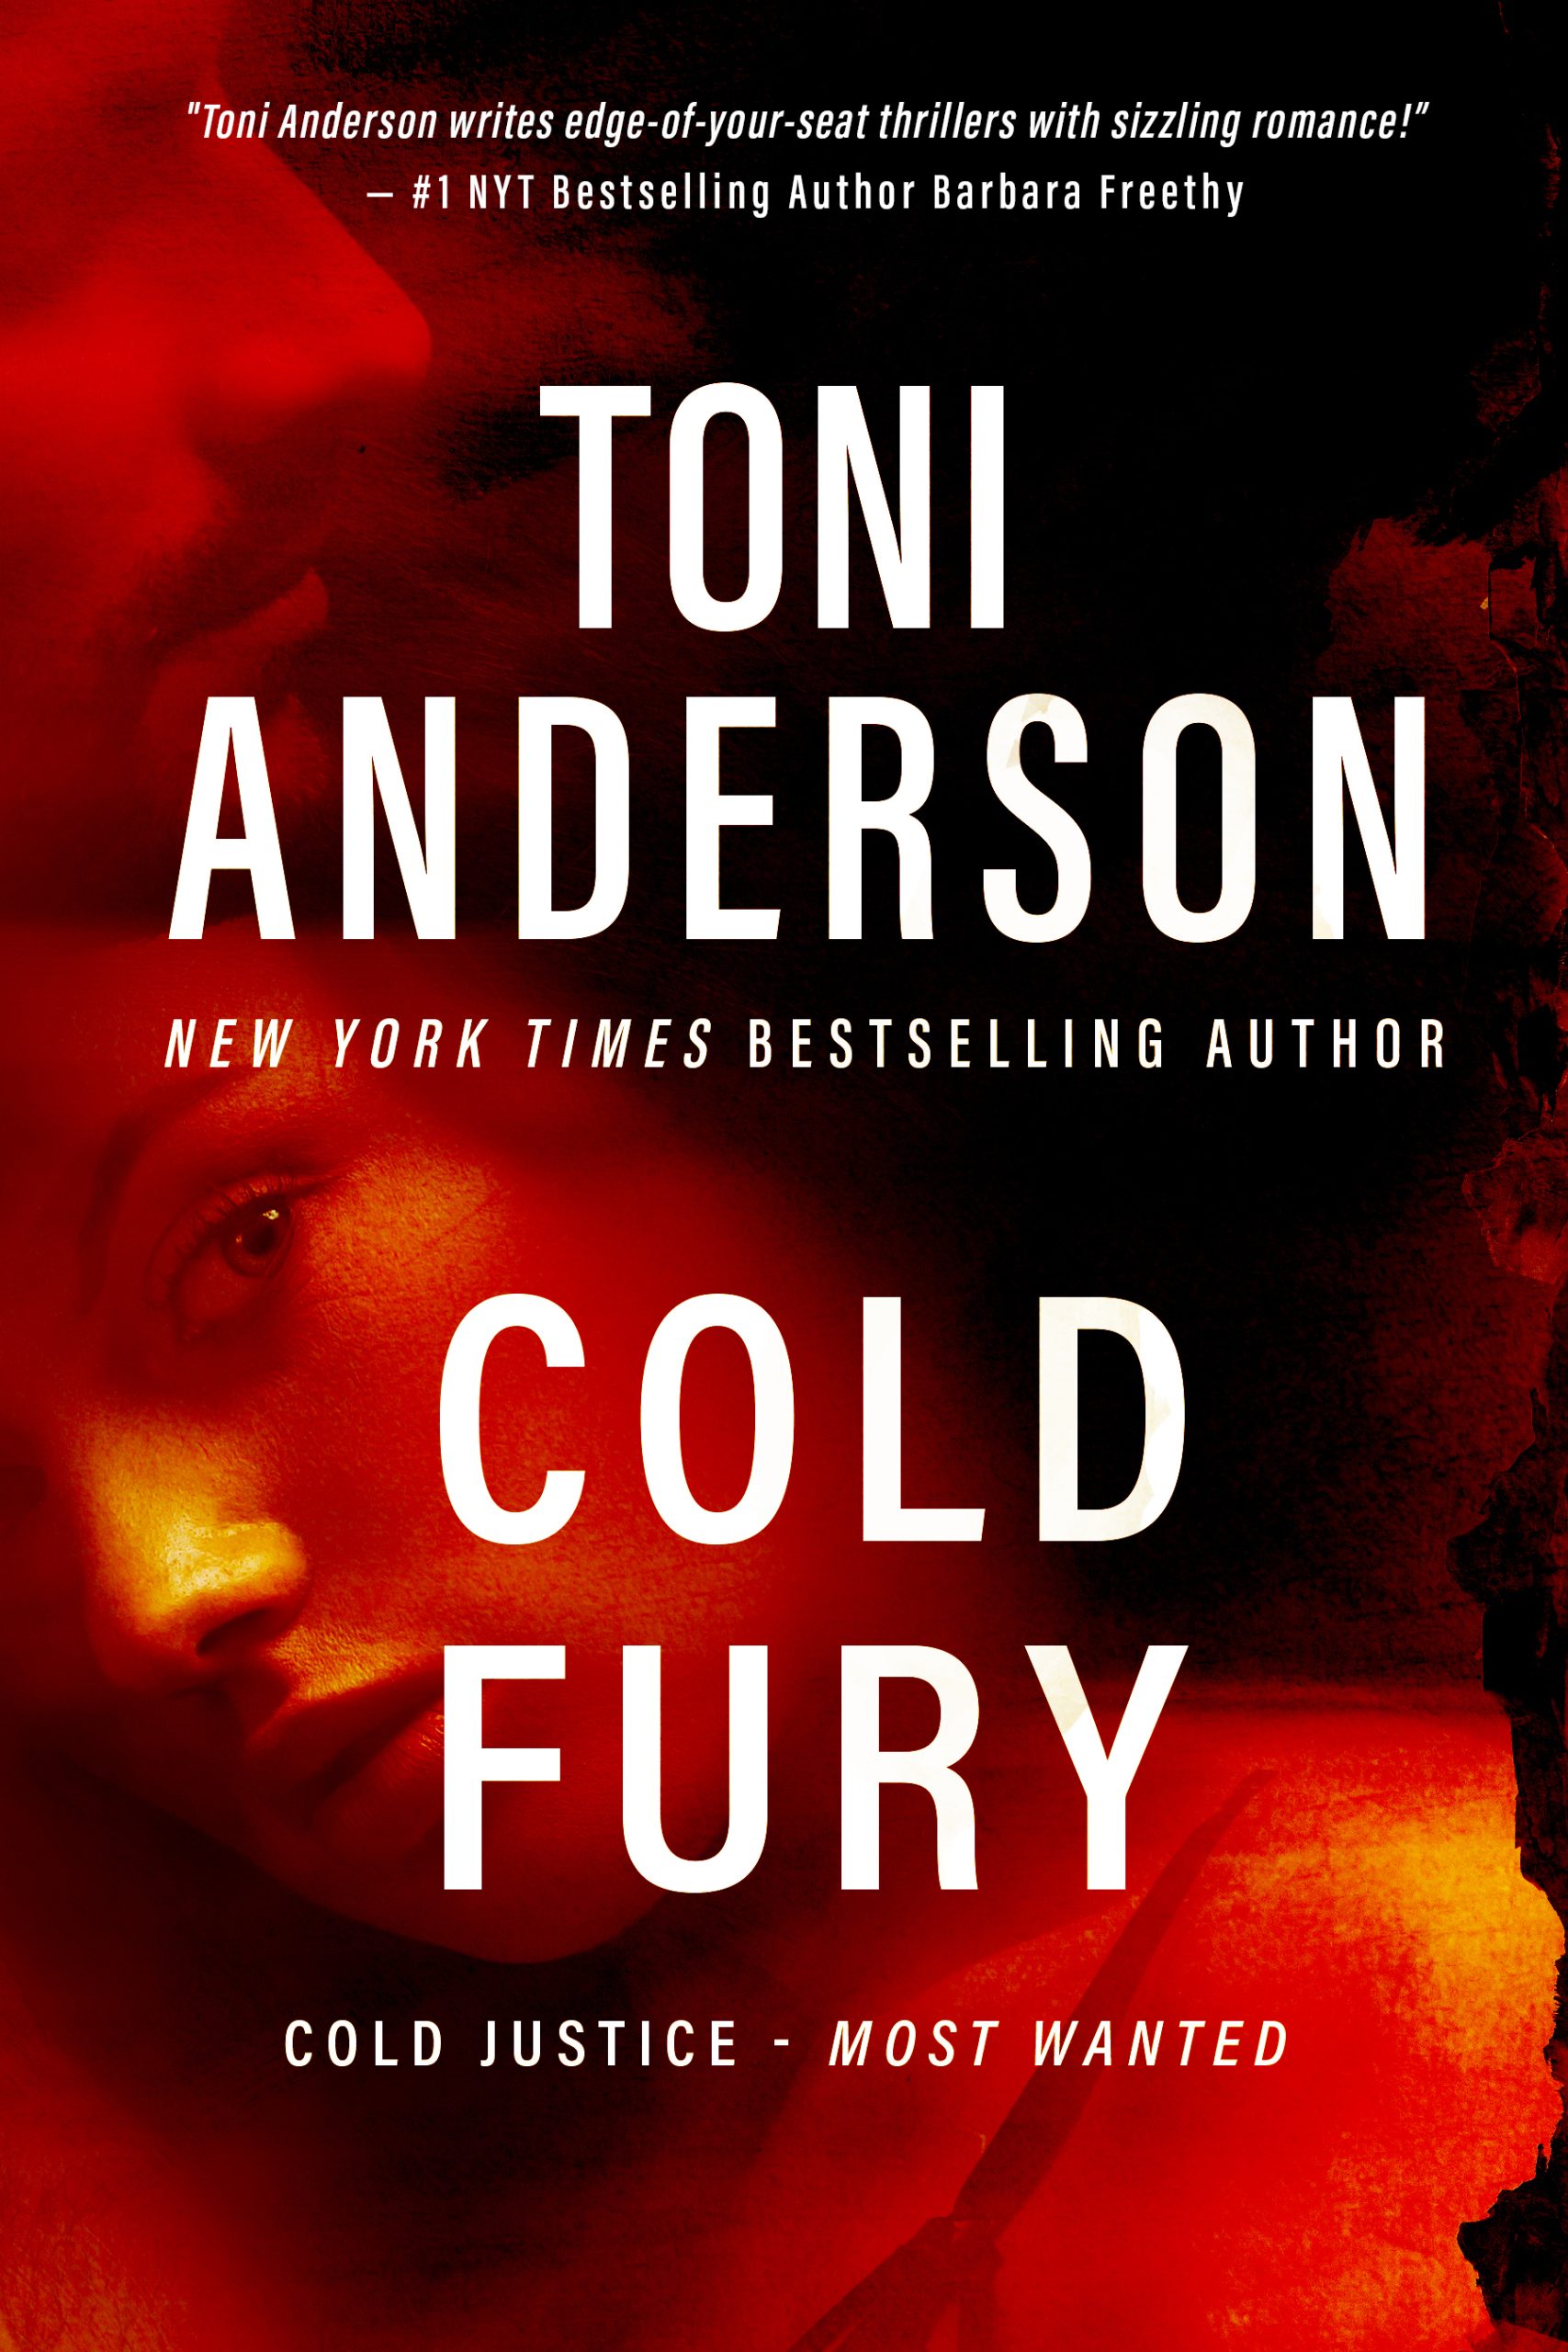 Cold Fury by Toni Anderson. Romantic Thriller